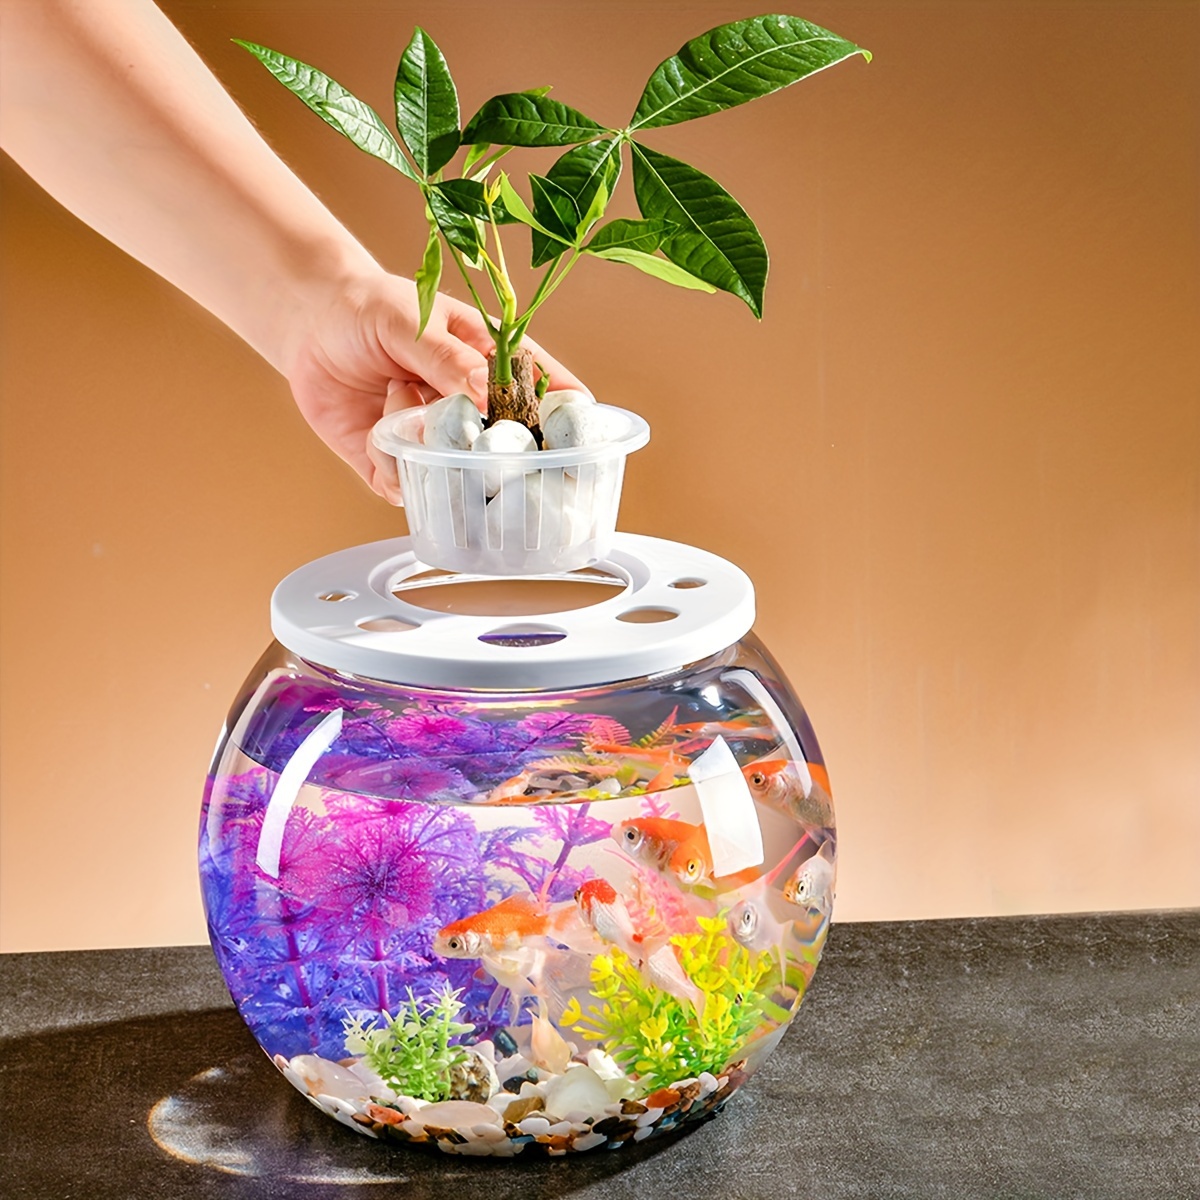 1pc Small Covered Fish Tank For Landscaping, Plastic Small Goldfish Tank  For Living Room, Green Plant Hydroponic Ecological Tank For Bedroom, Desk,  Go